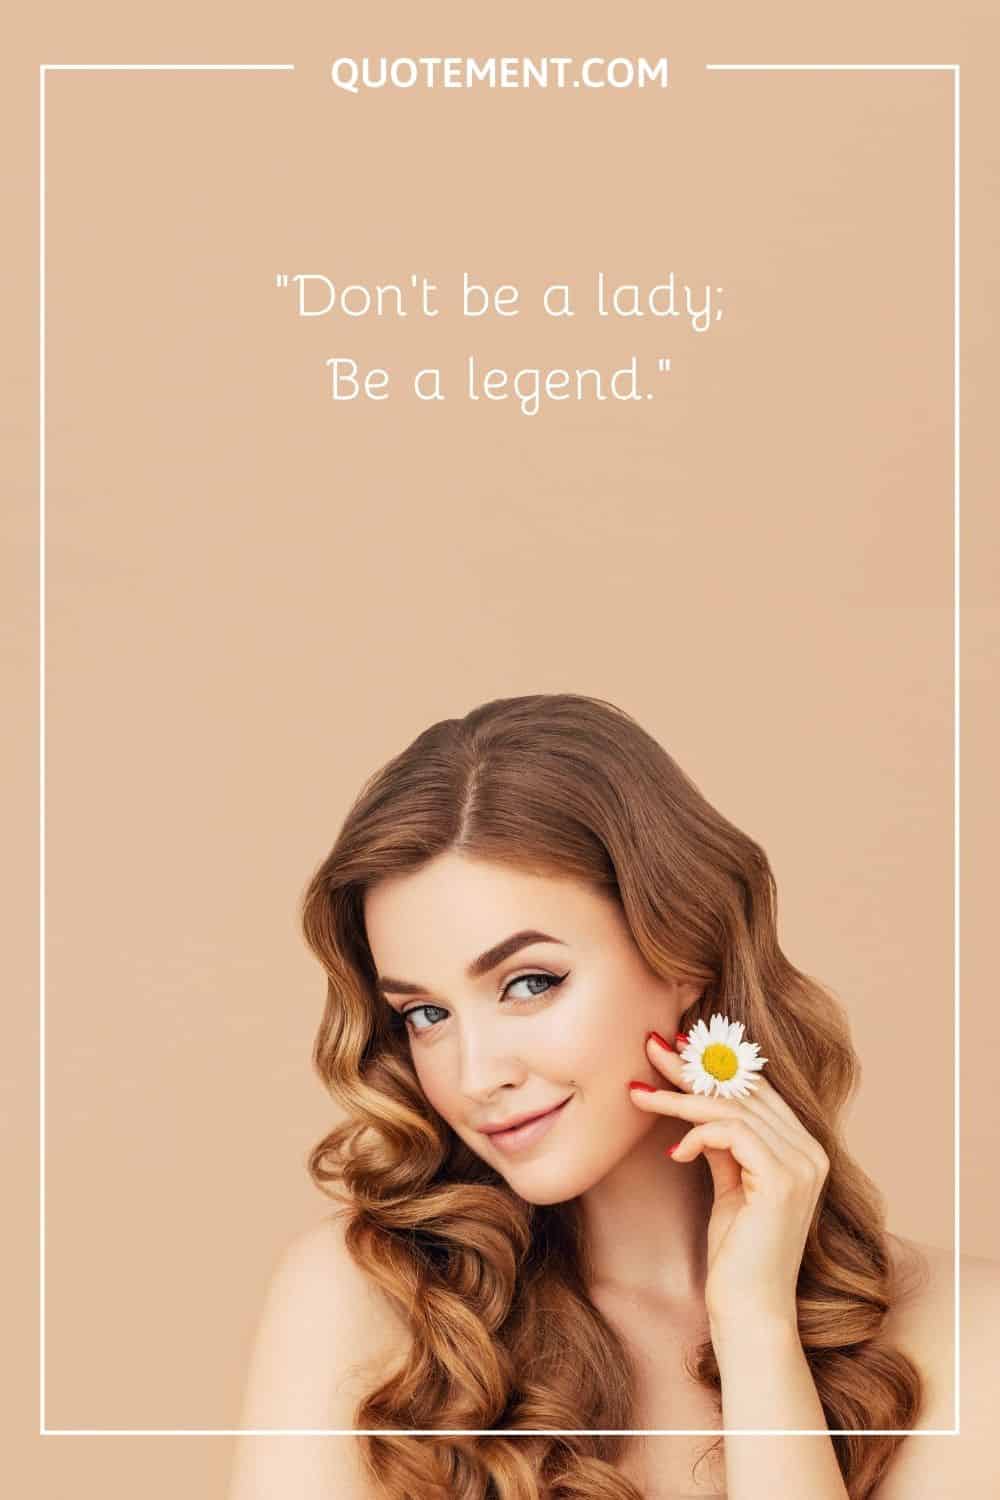 Don't be a lady; Be a legend.